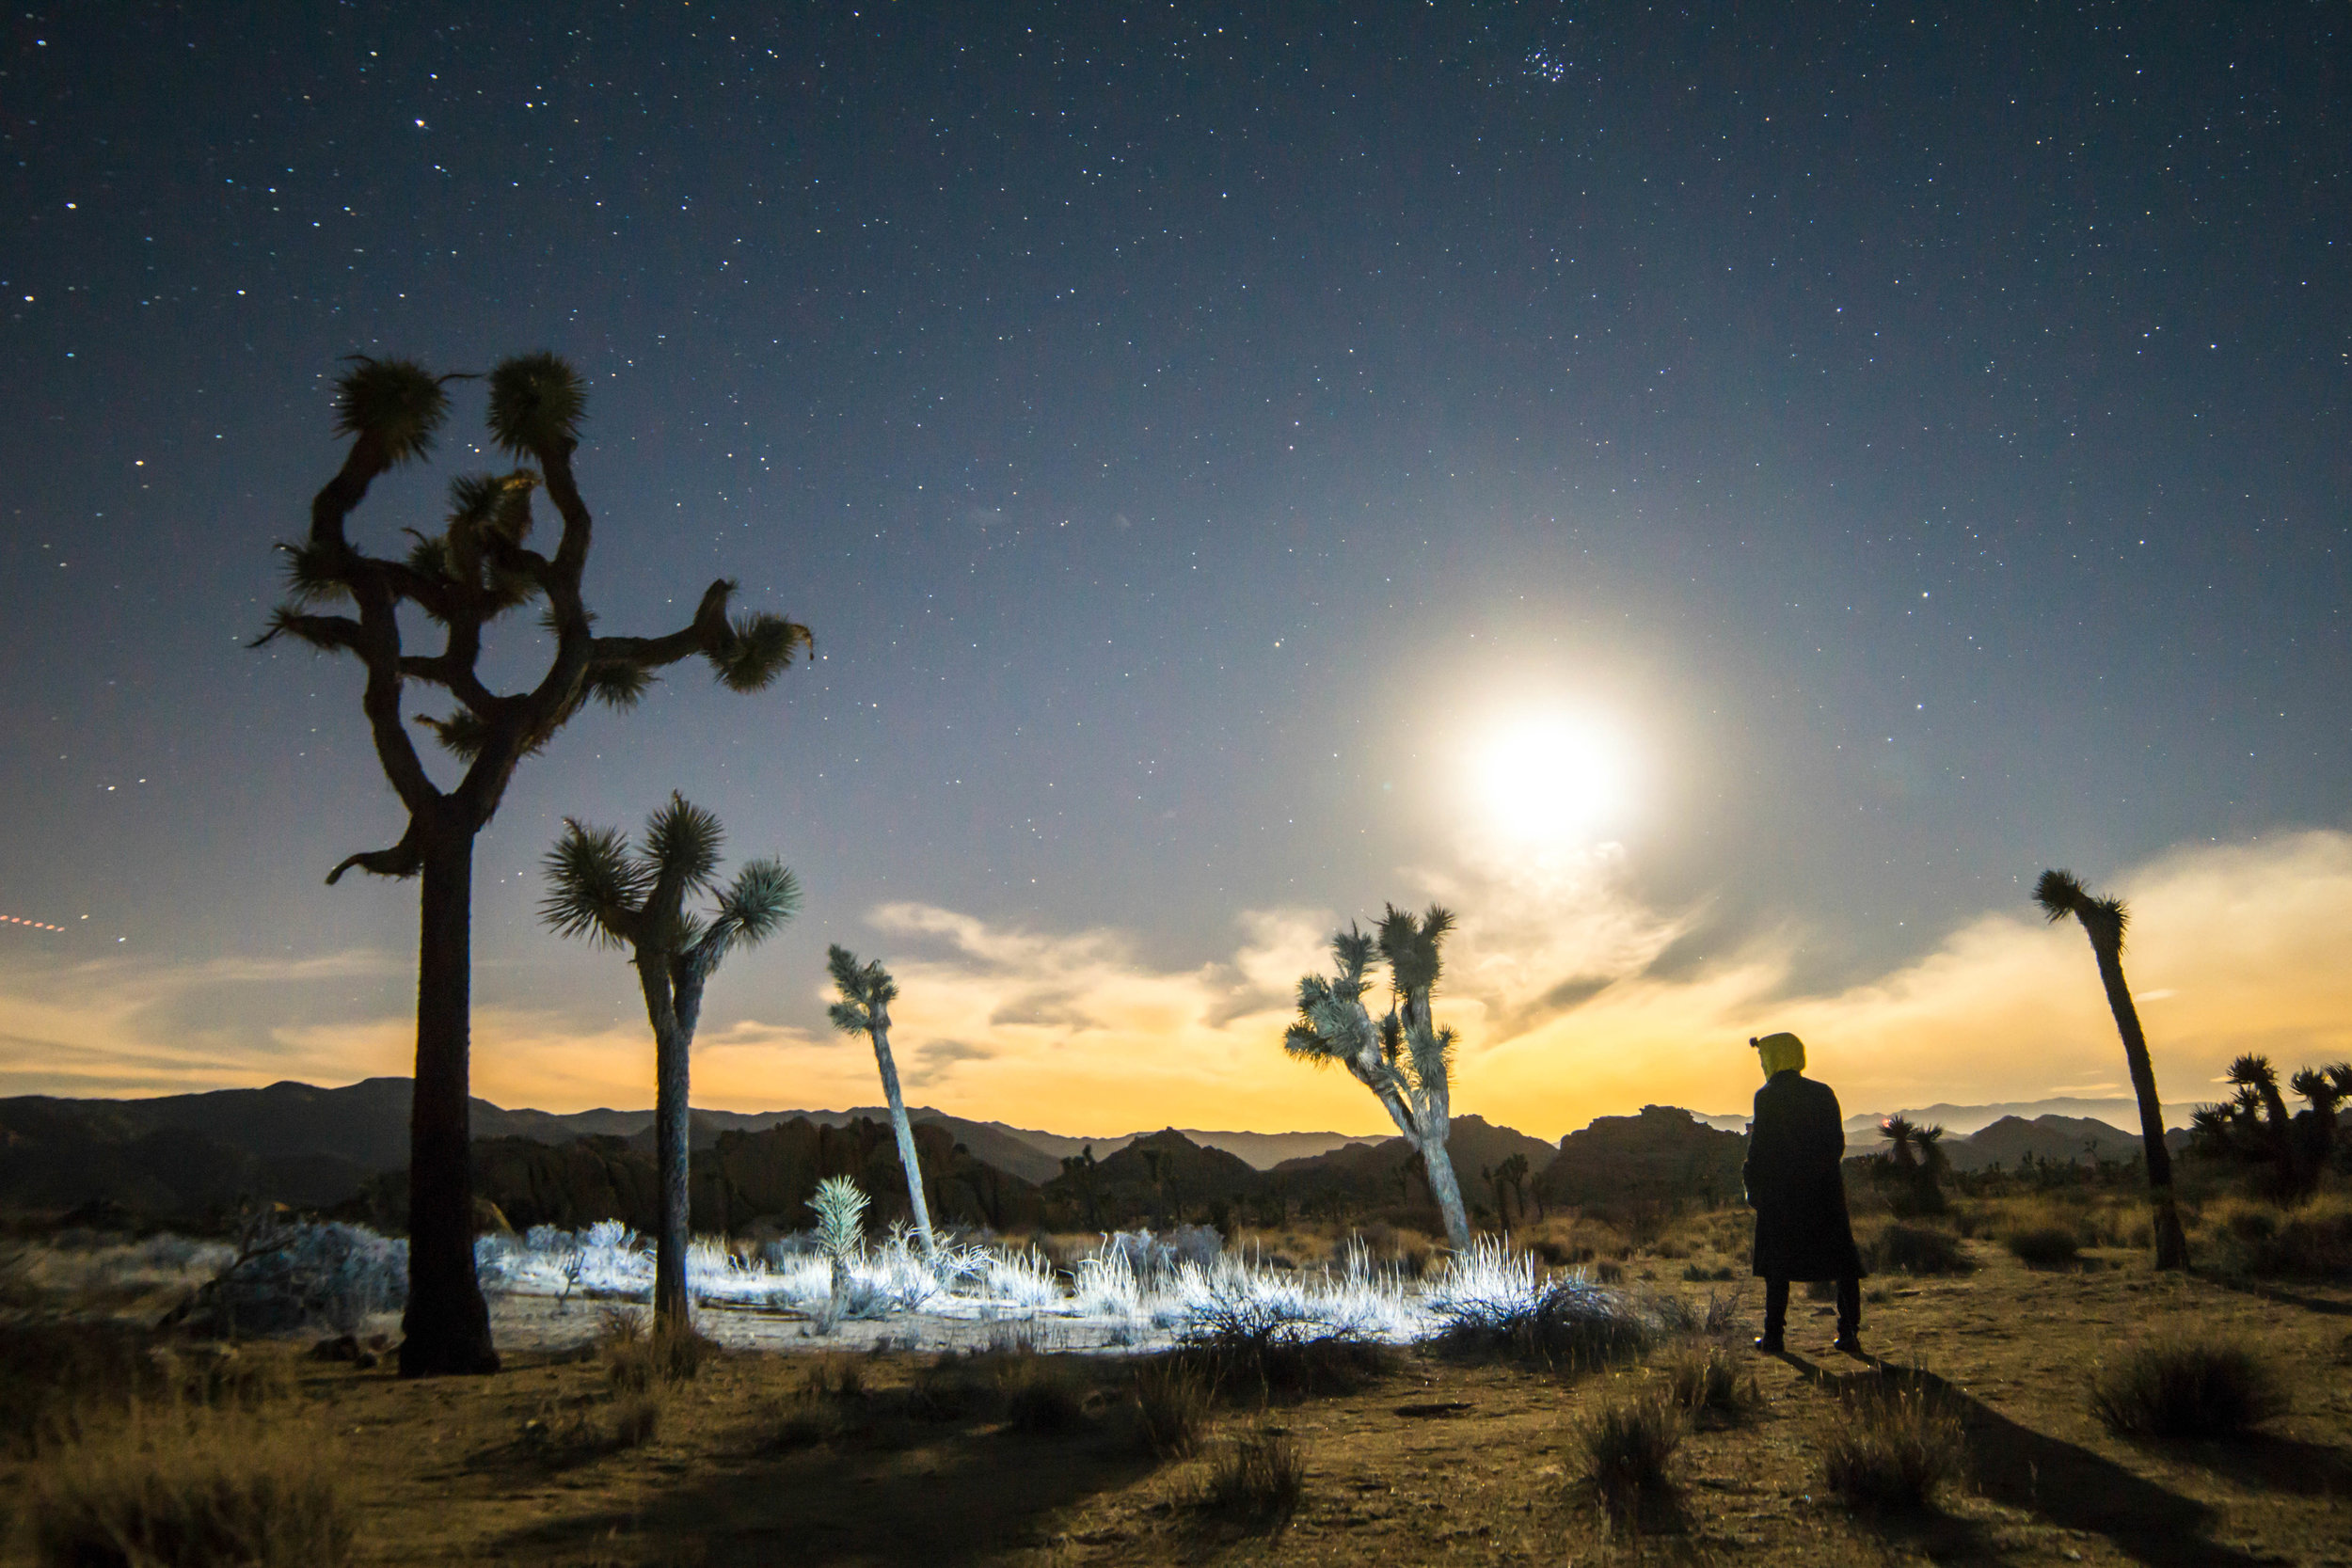 This is the best time to experience this foreign world; the funky silhouettes of the Joshua Trees reaching for the vast starry sky above appear truly extraterrestrial.